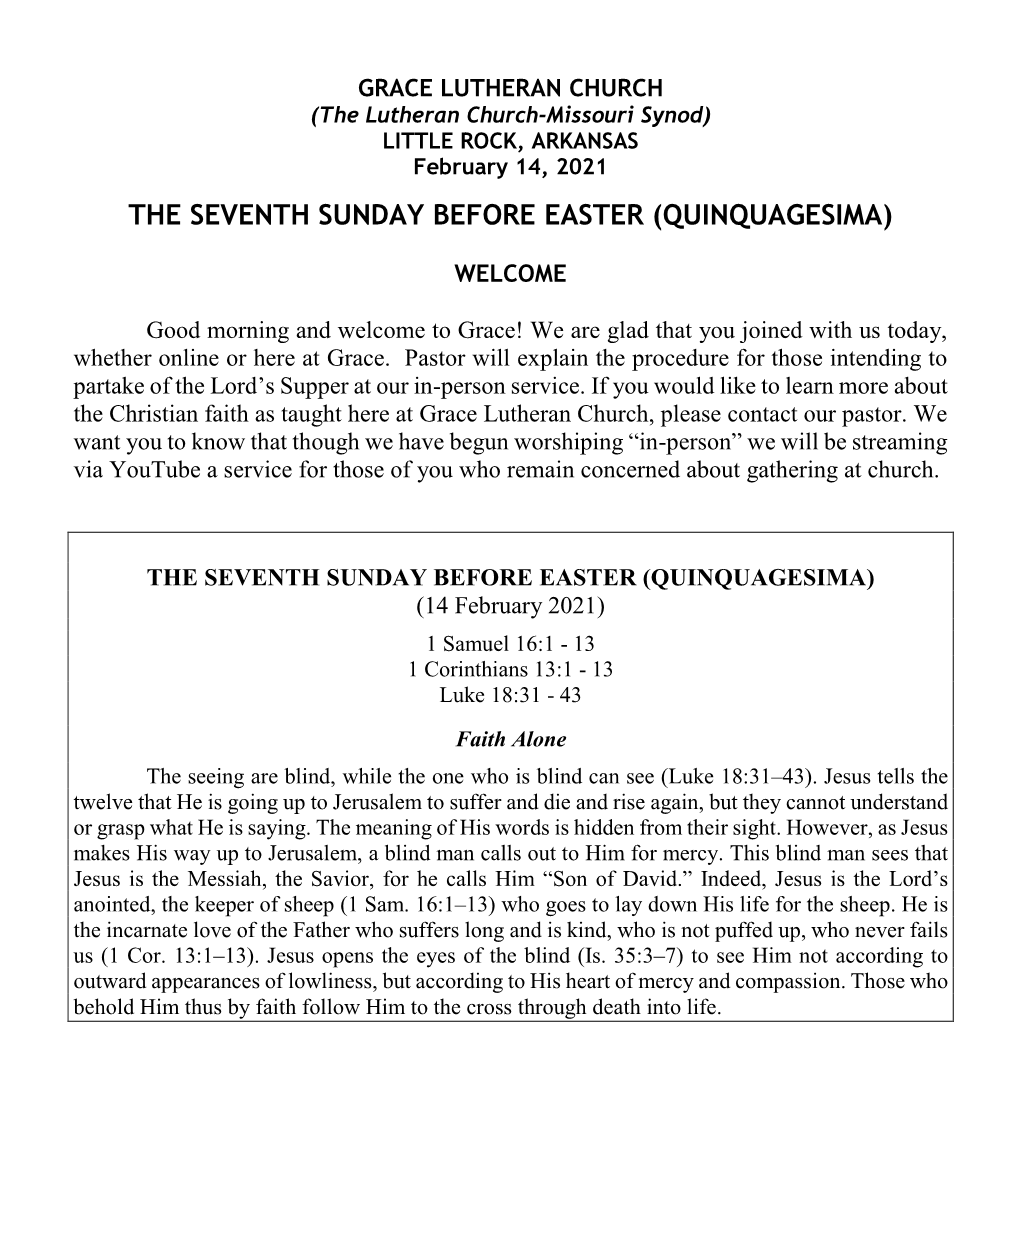 The Seventh Sunday Before Easter (Quinquagesima)